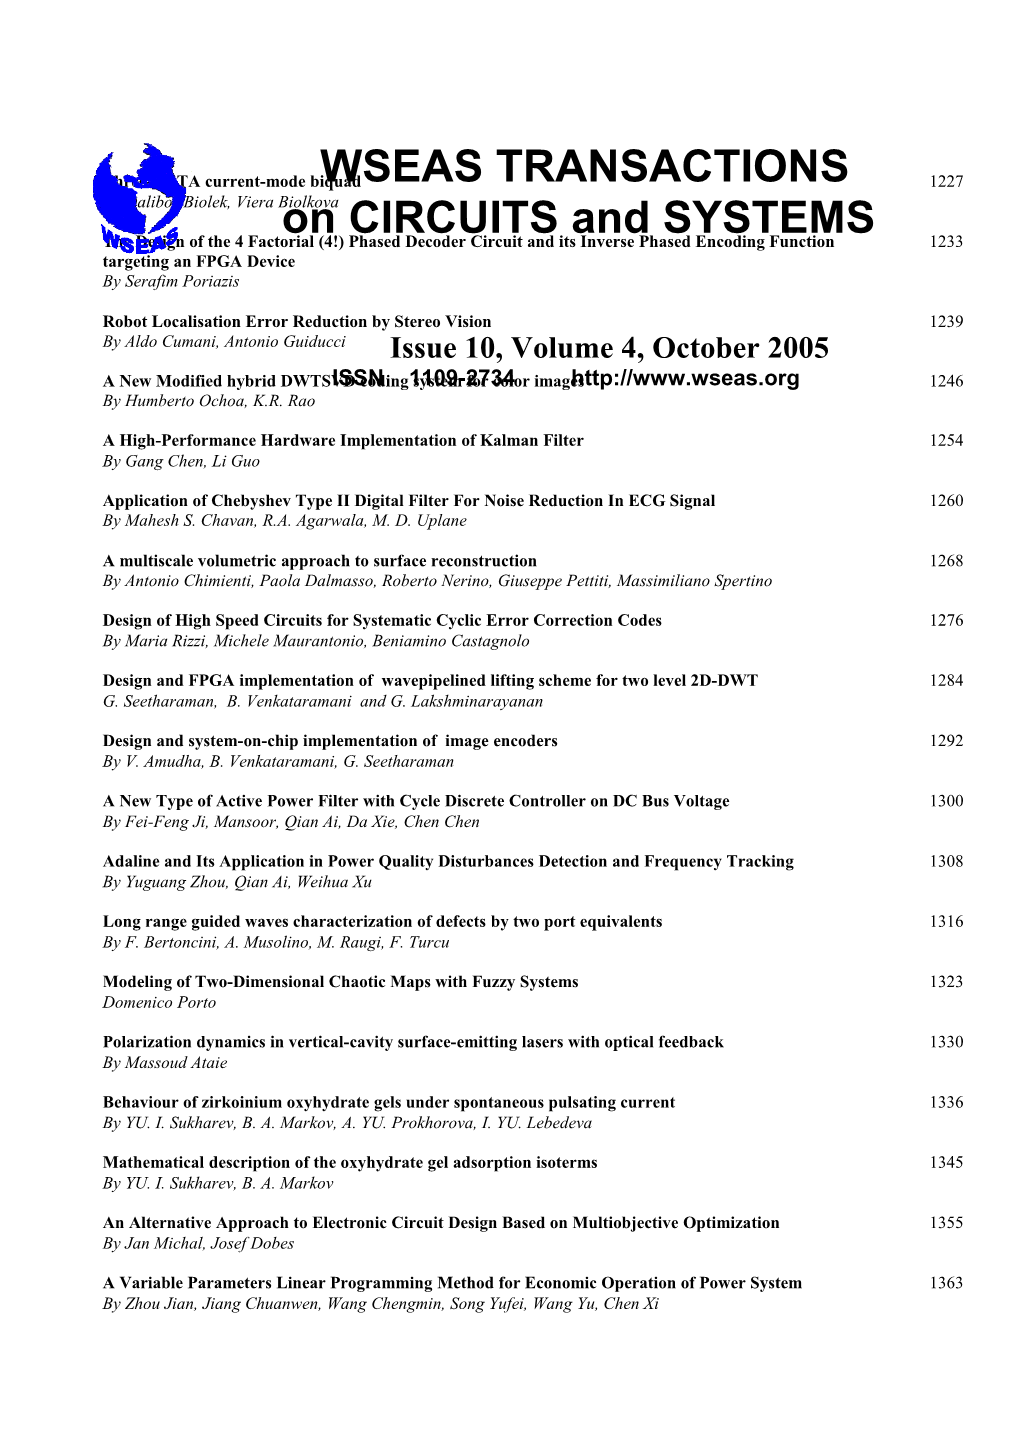 WSEAS Trans. on CIRCUITS and SYSTEMS, October 2005